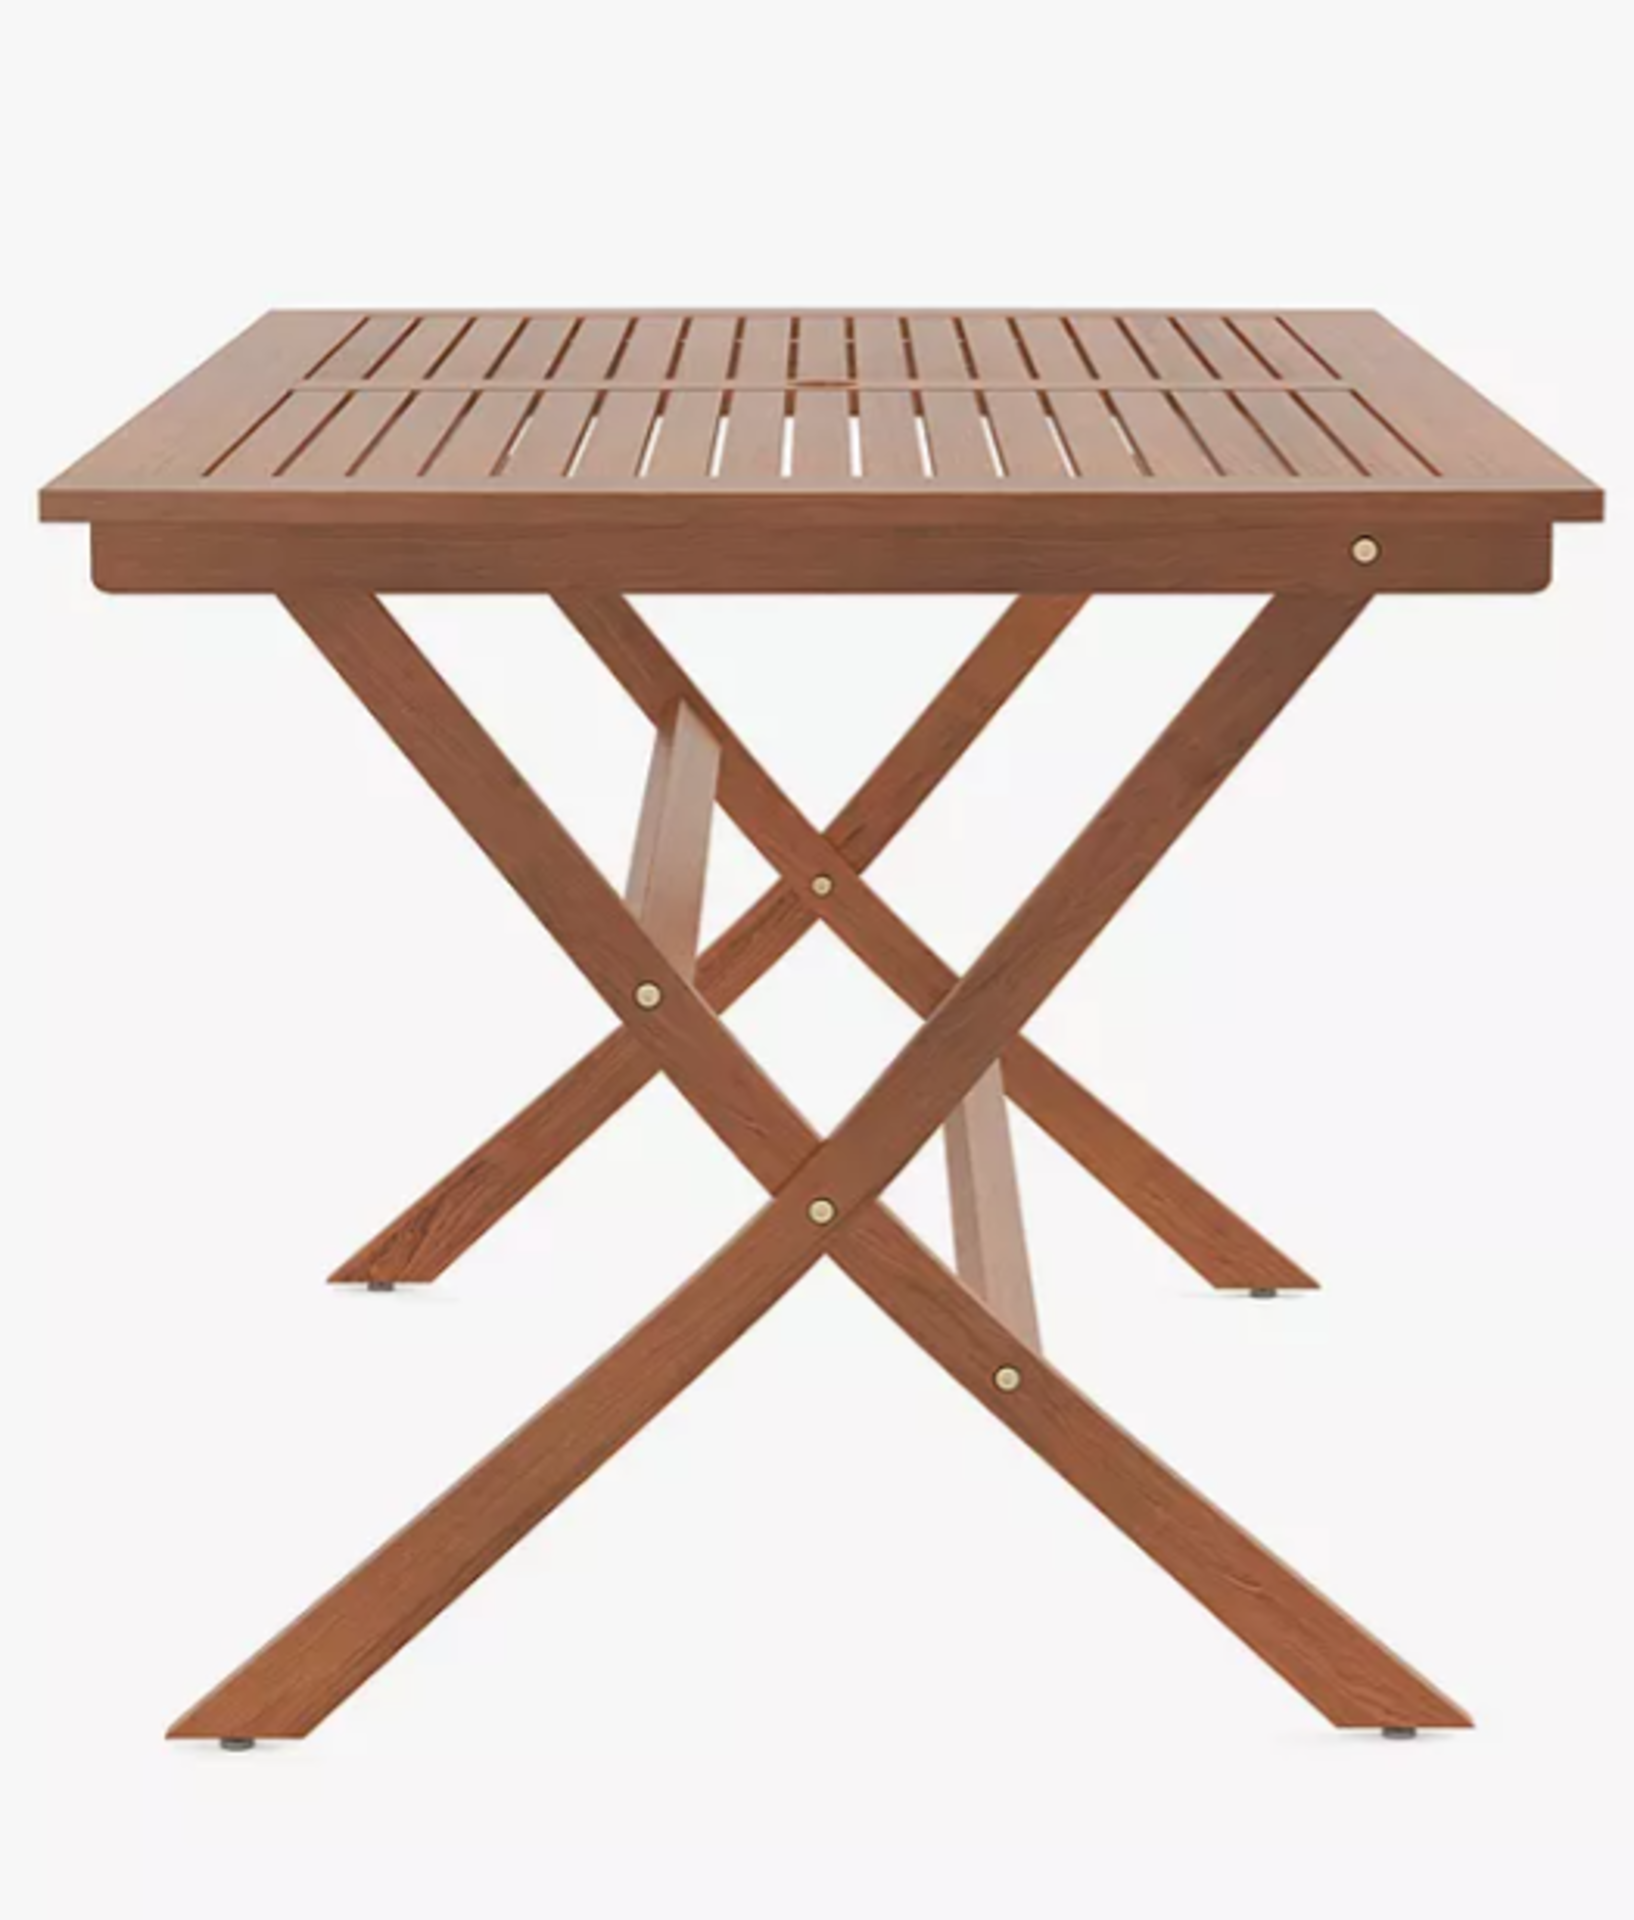 BRAND NEW JOHN LEWIS 6-Seater Folding Garden Dining Table, FSC-Certified (Eucalyptus Wood), Natural. - Image 3 of 3